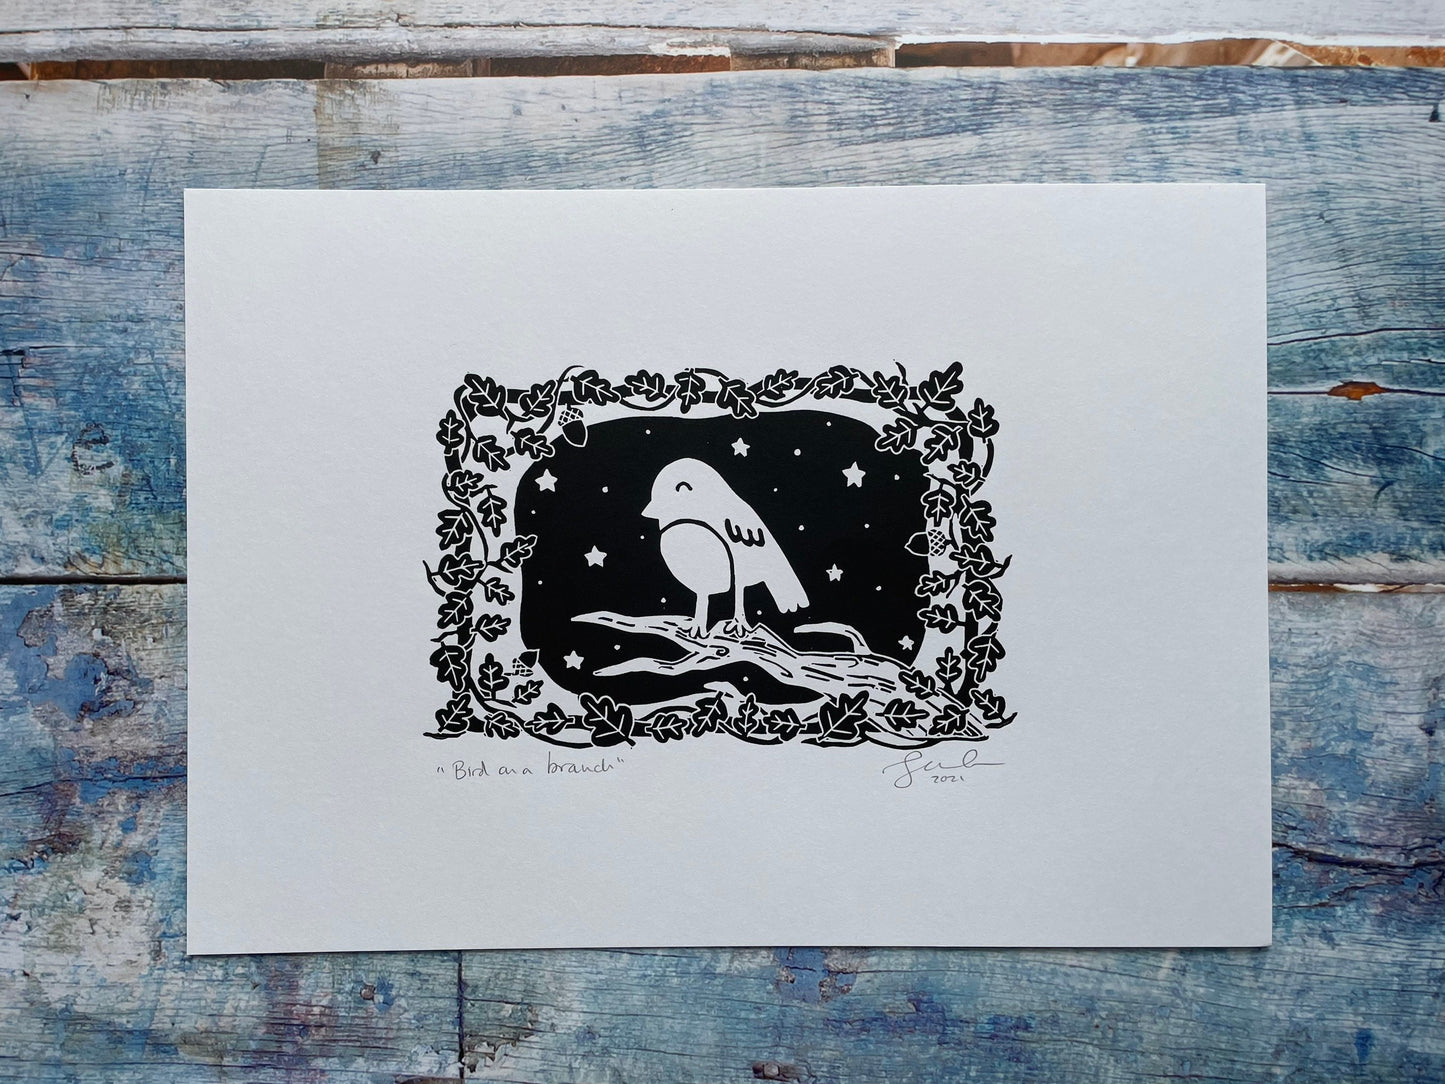 A small lino print of a robin on a tree surrounded by oak leaves and stars